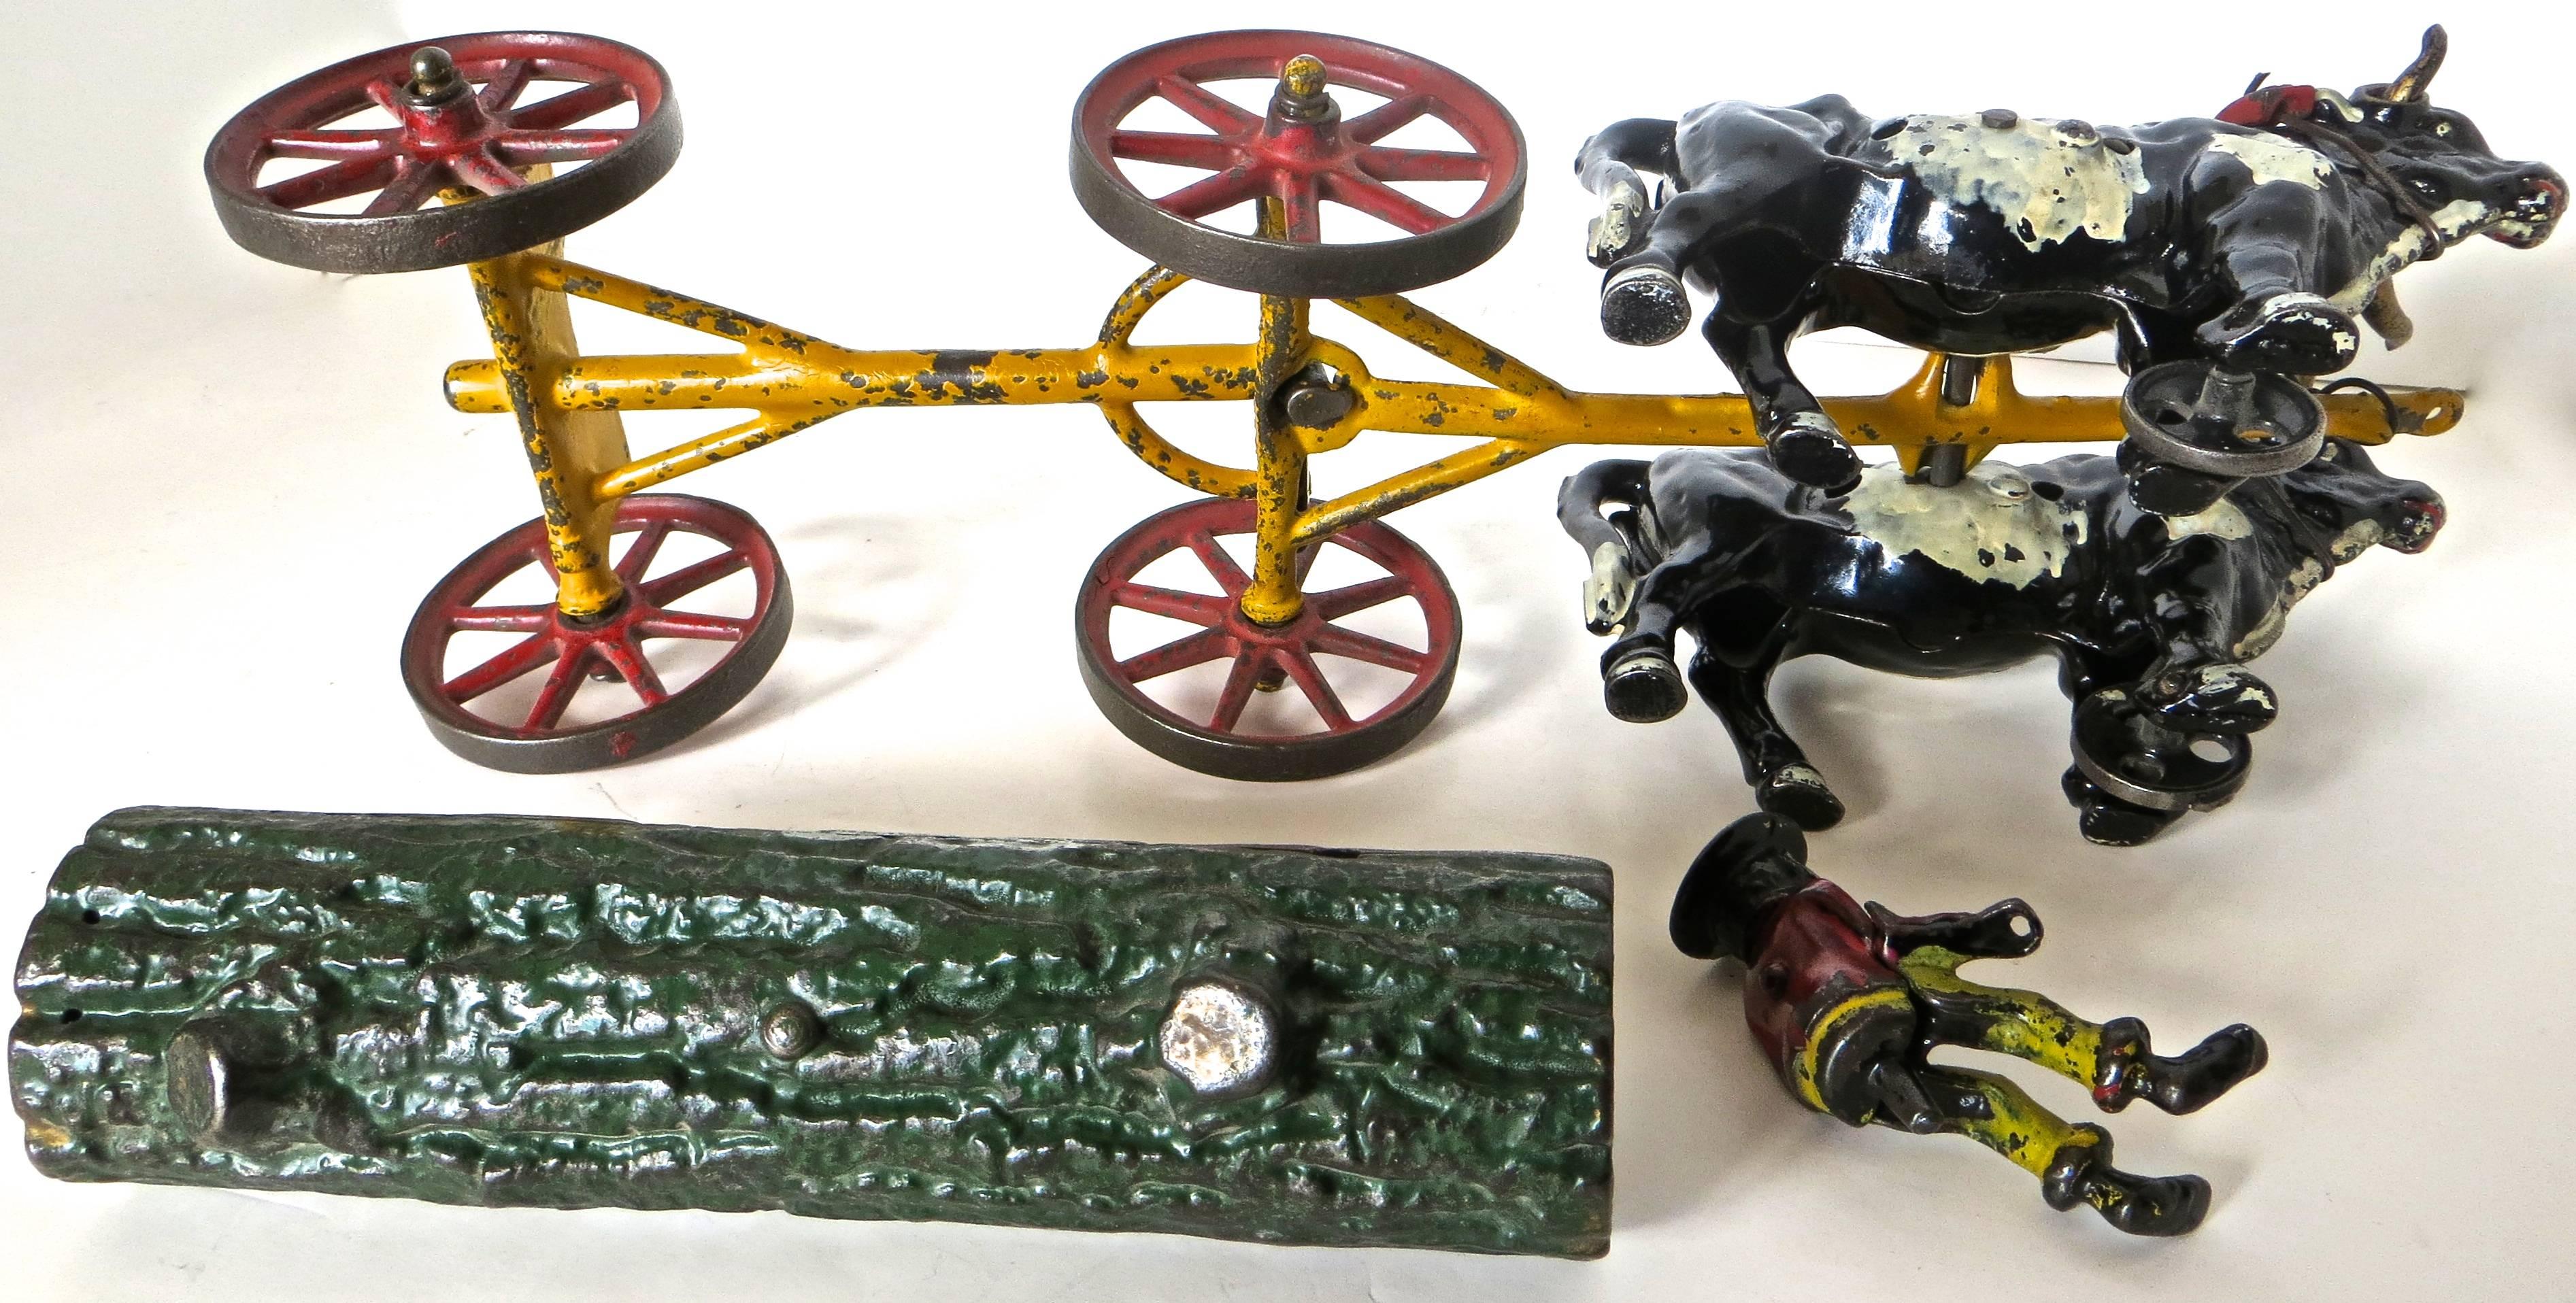 Early 20th Century American Cast Iron Toy, Oxen Drawn Log on Carriage with Rider by Hubley